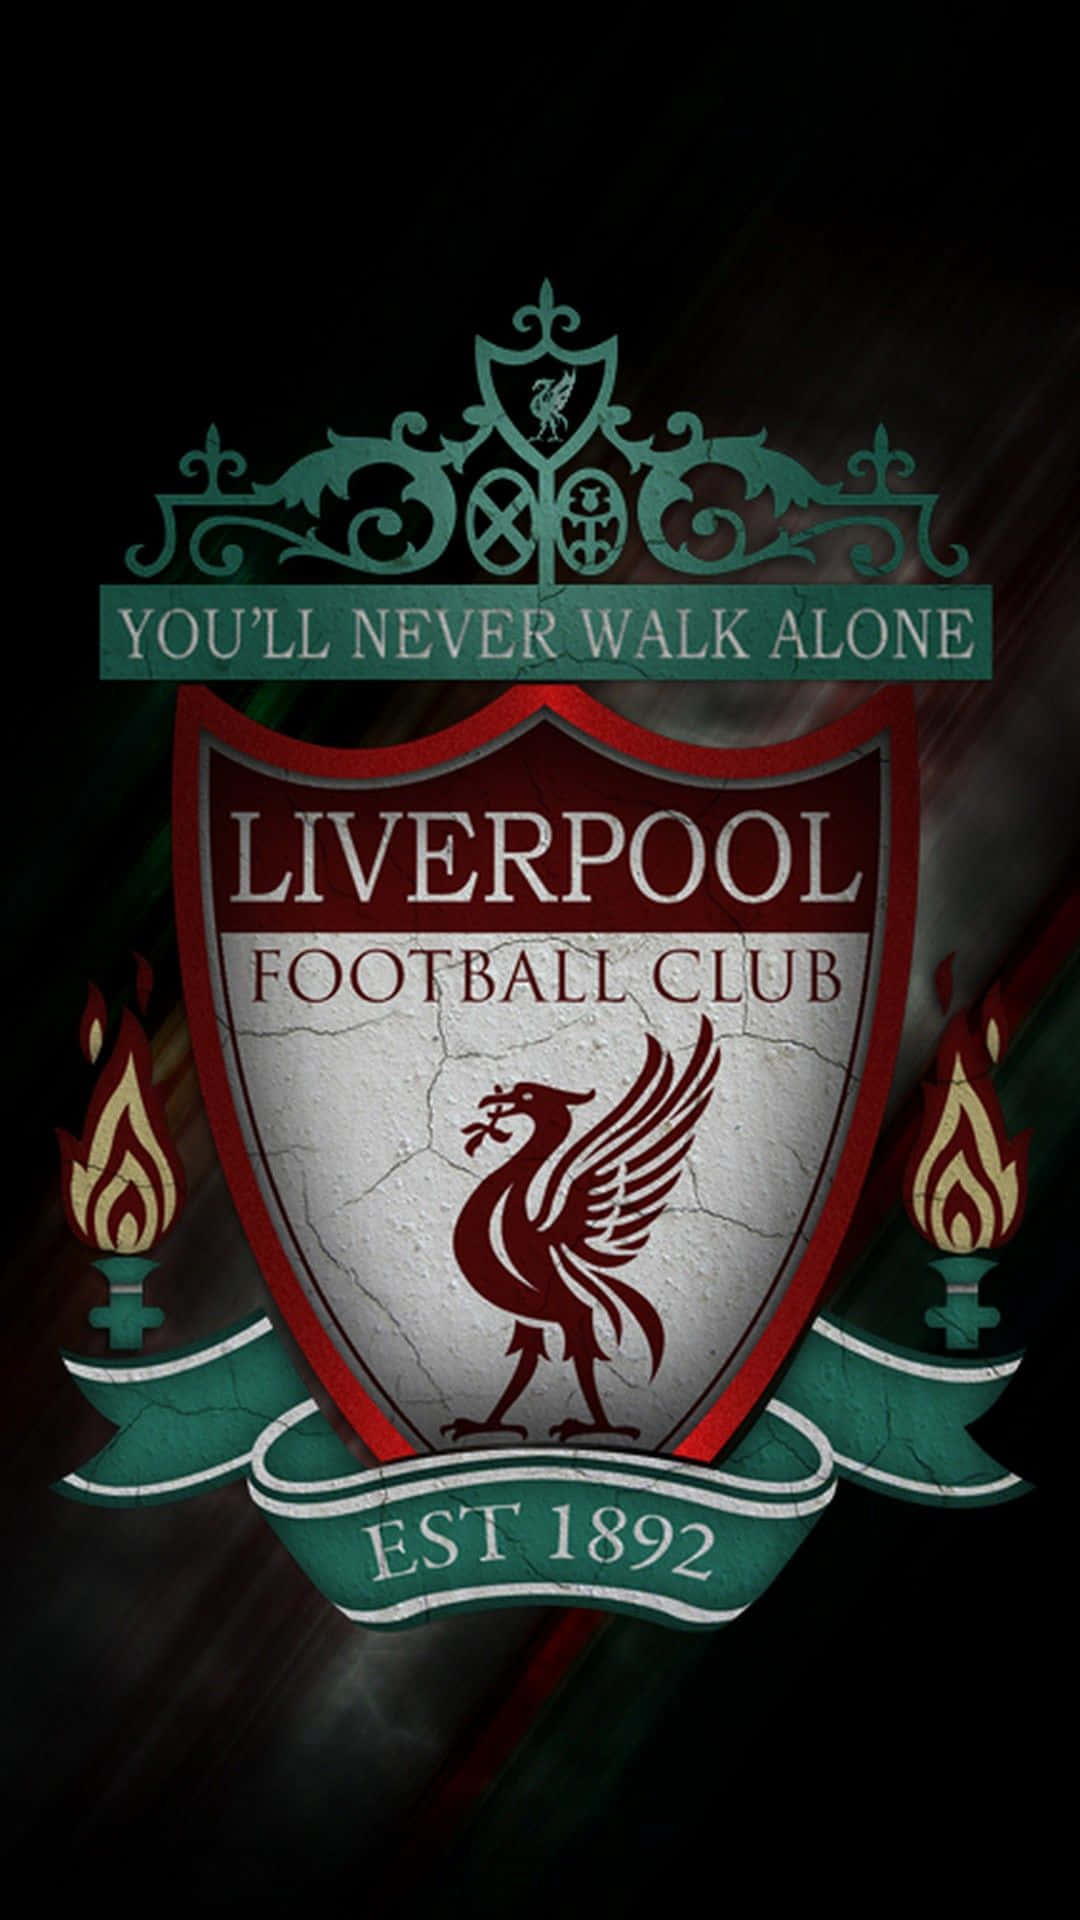 Experience Premier League action on your mobile device with a #LiverpooliPhone Wallpaper